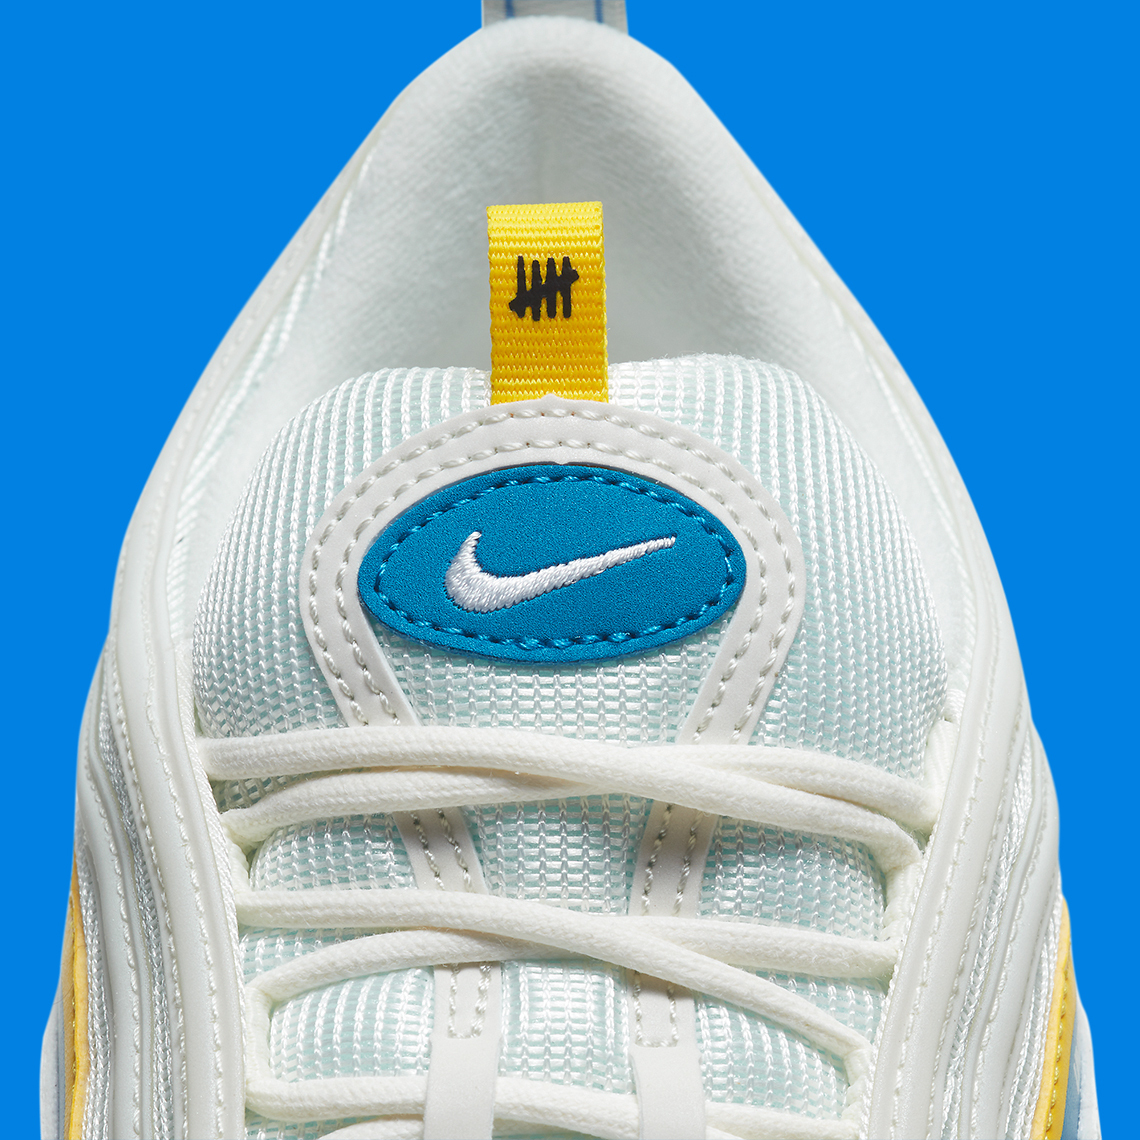 Undefeated Nike Air Max 97 Sail Aero Blue Midwest Gold DC4830-100 